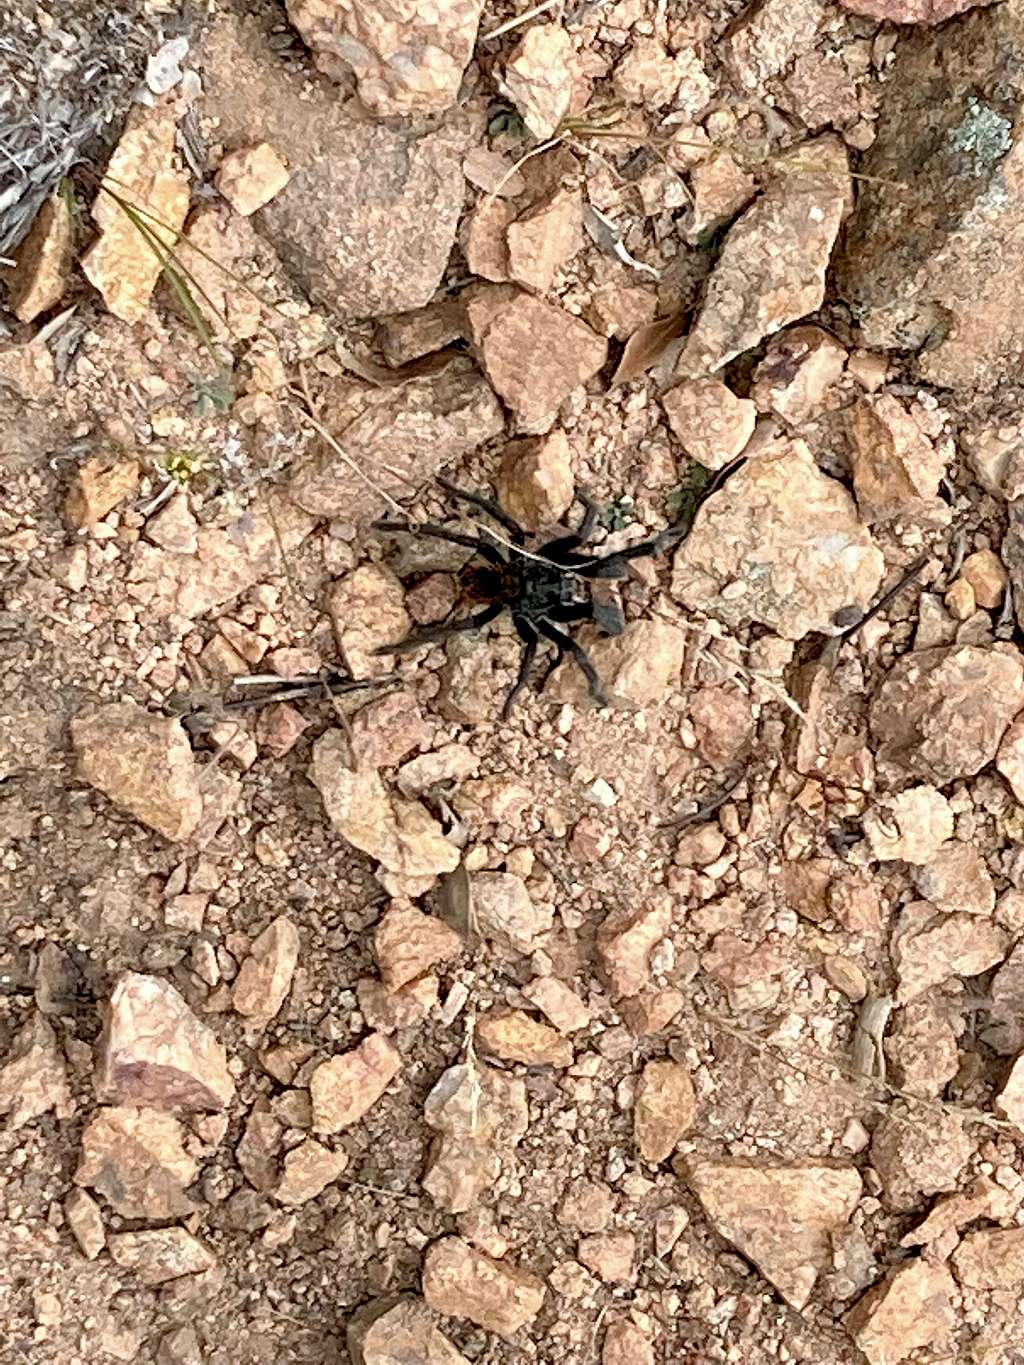 Tarantula on the trail coming down Thumb Butte